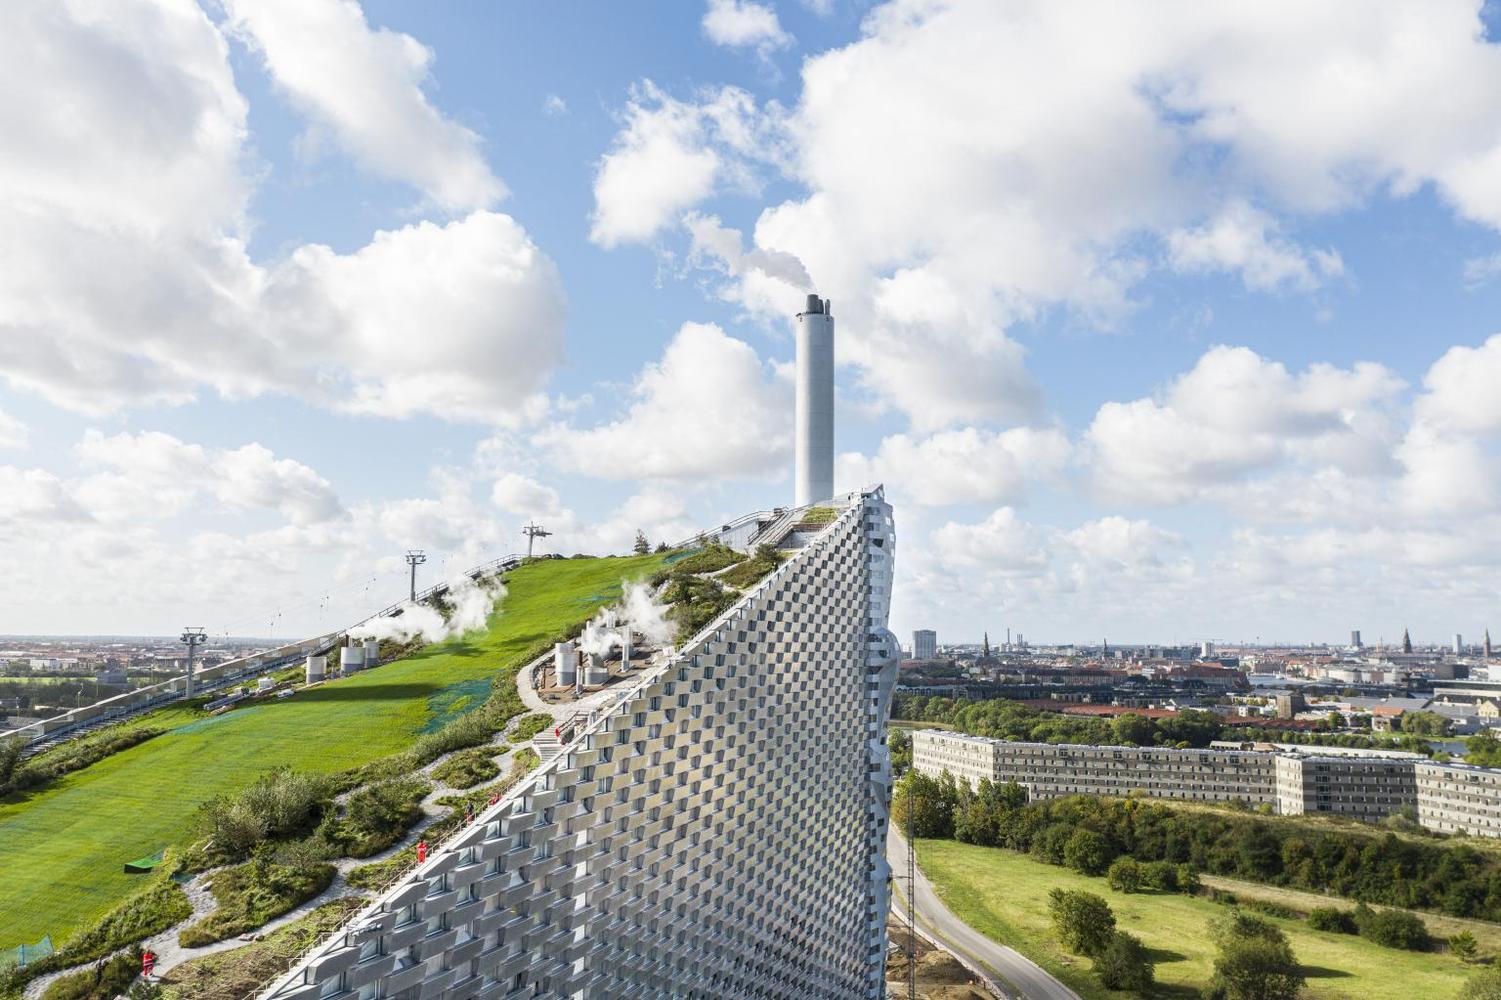 A modern energy plant building in Copenhagen with artificial ski slope